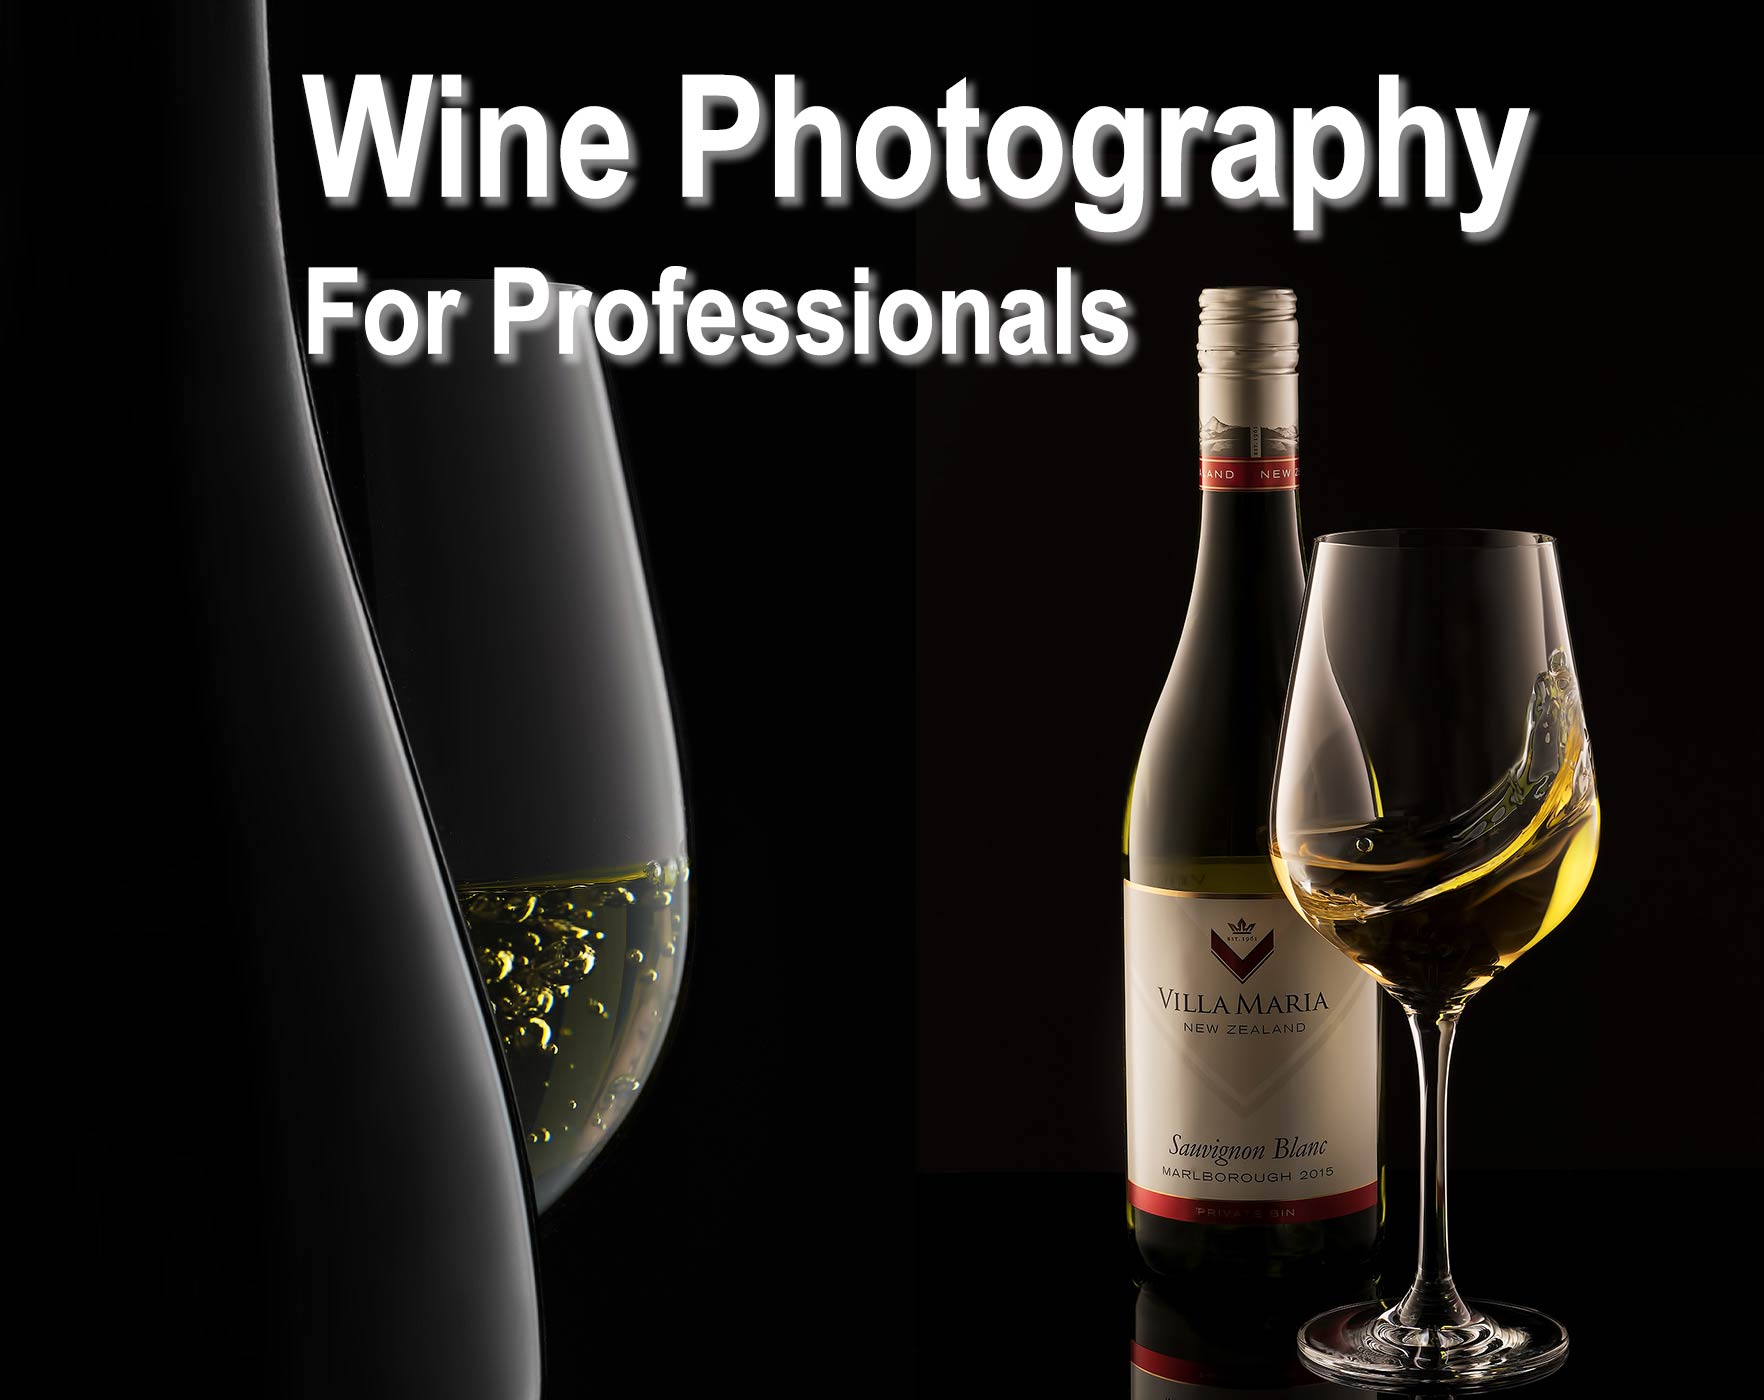 wine-photography-for-professionals-course-cover-2.jpg